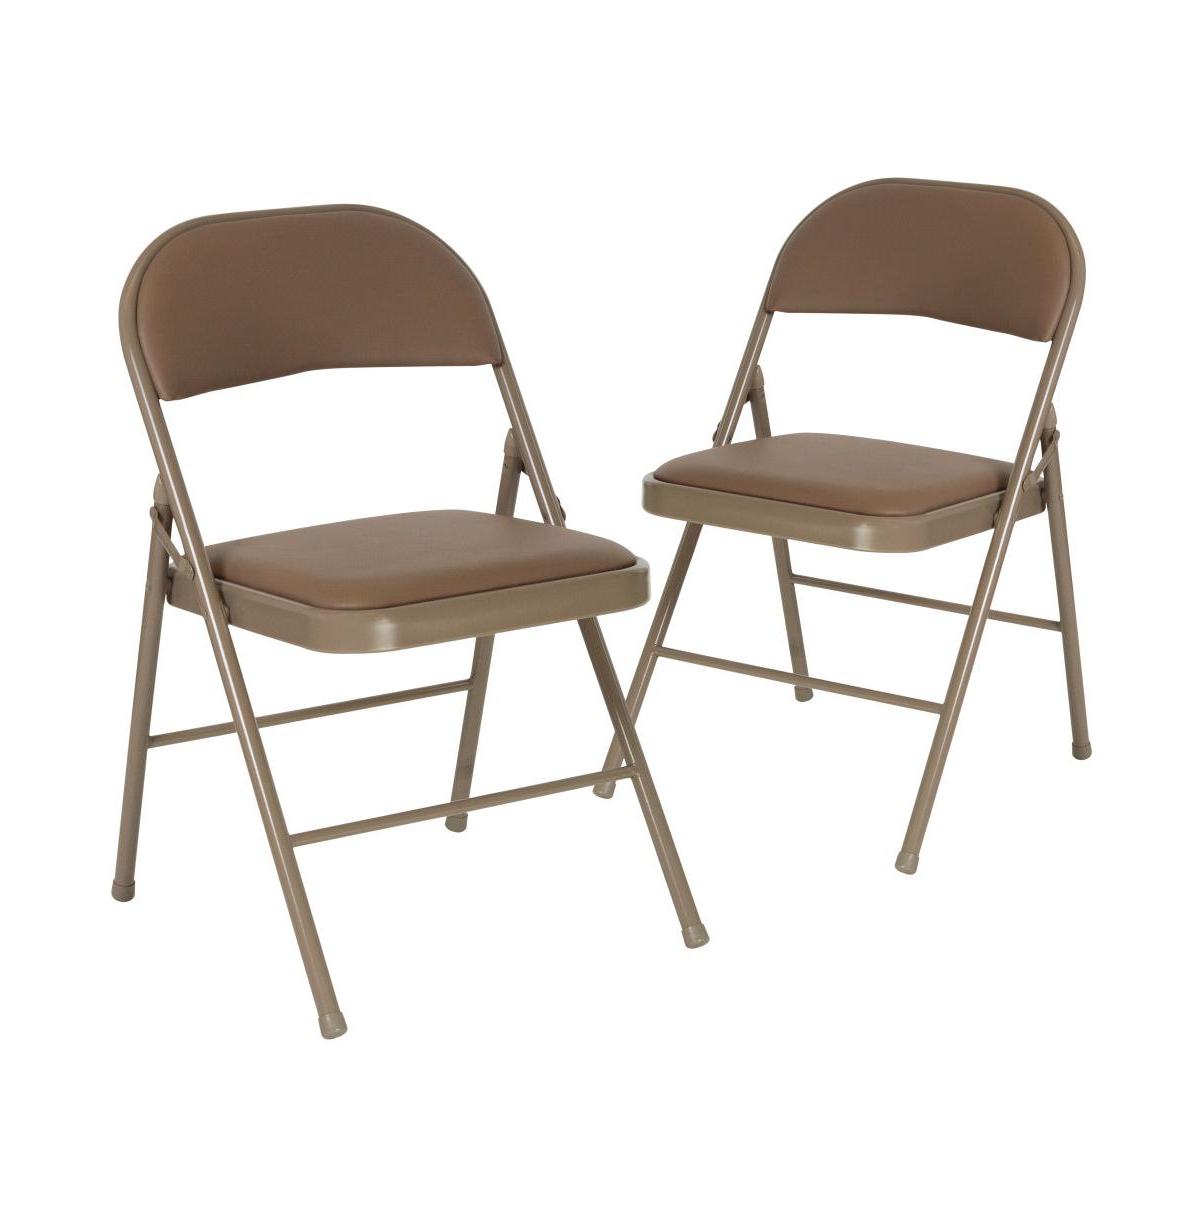 Emma+oliver 2 Pack Home & Office Portable Vinyl Folding Metal Event Chair In Beige